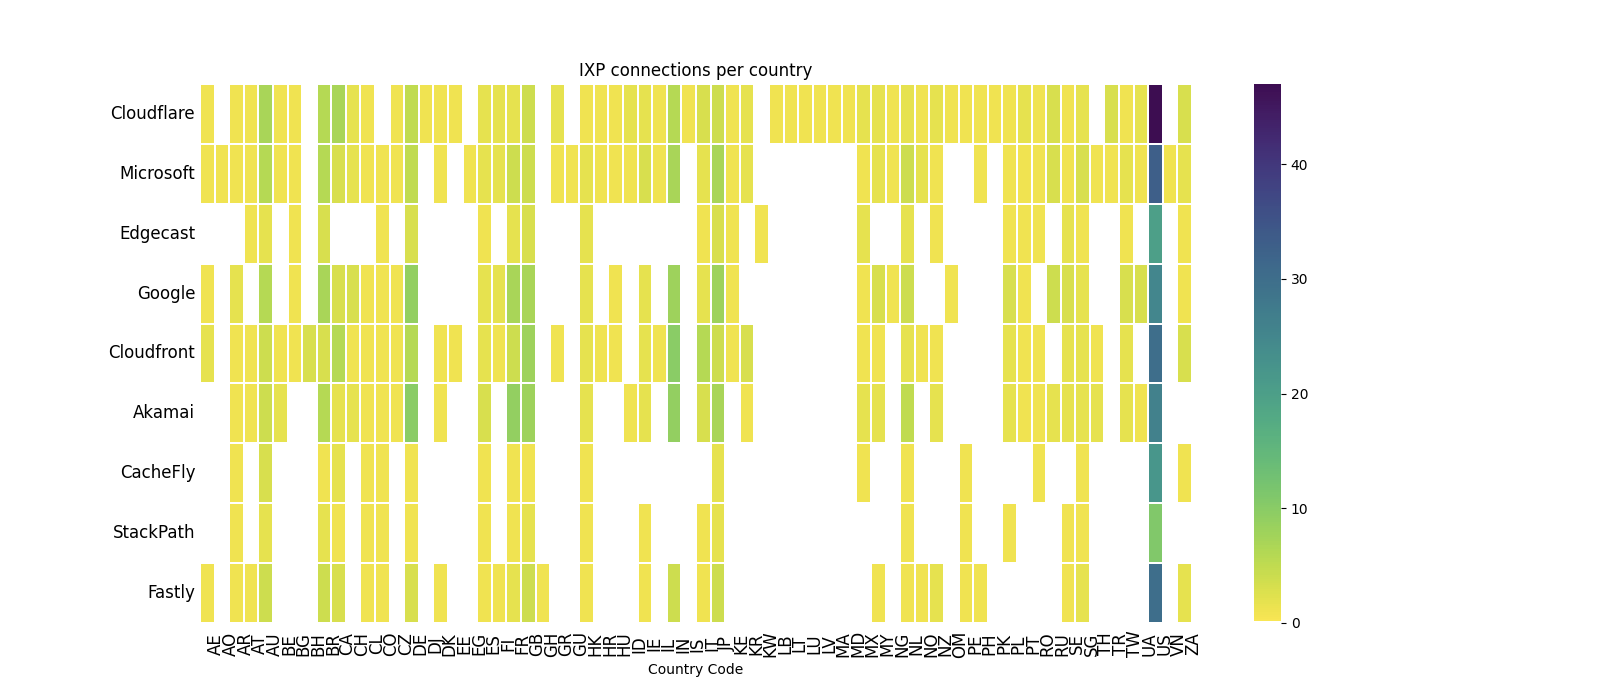 Heatmap of IXP connections per country for 9 major service providers, according to data from PeeringDB, Euro-IX and Packet Clearing House (PCH) for October 2021.